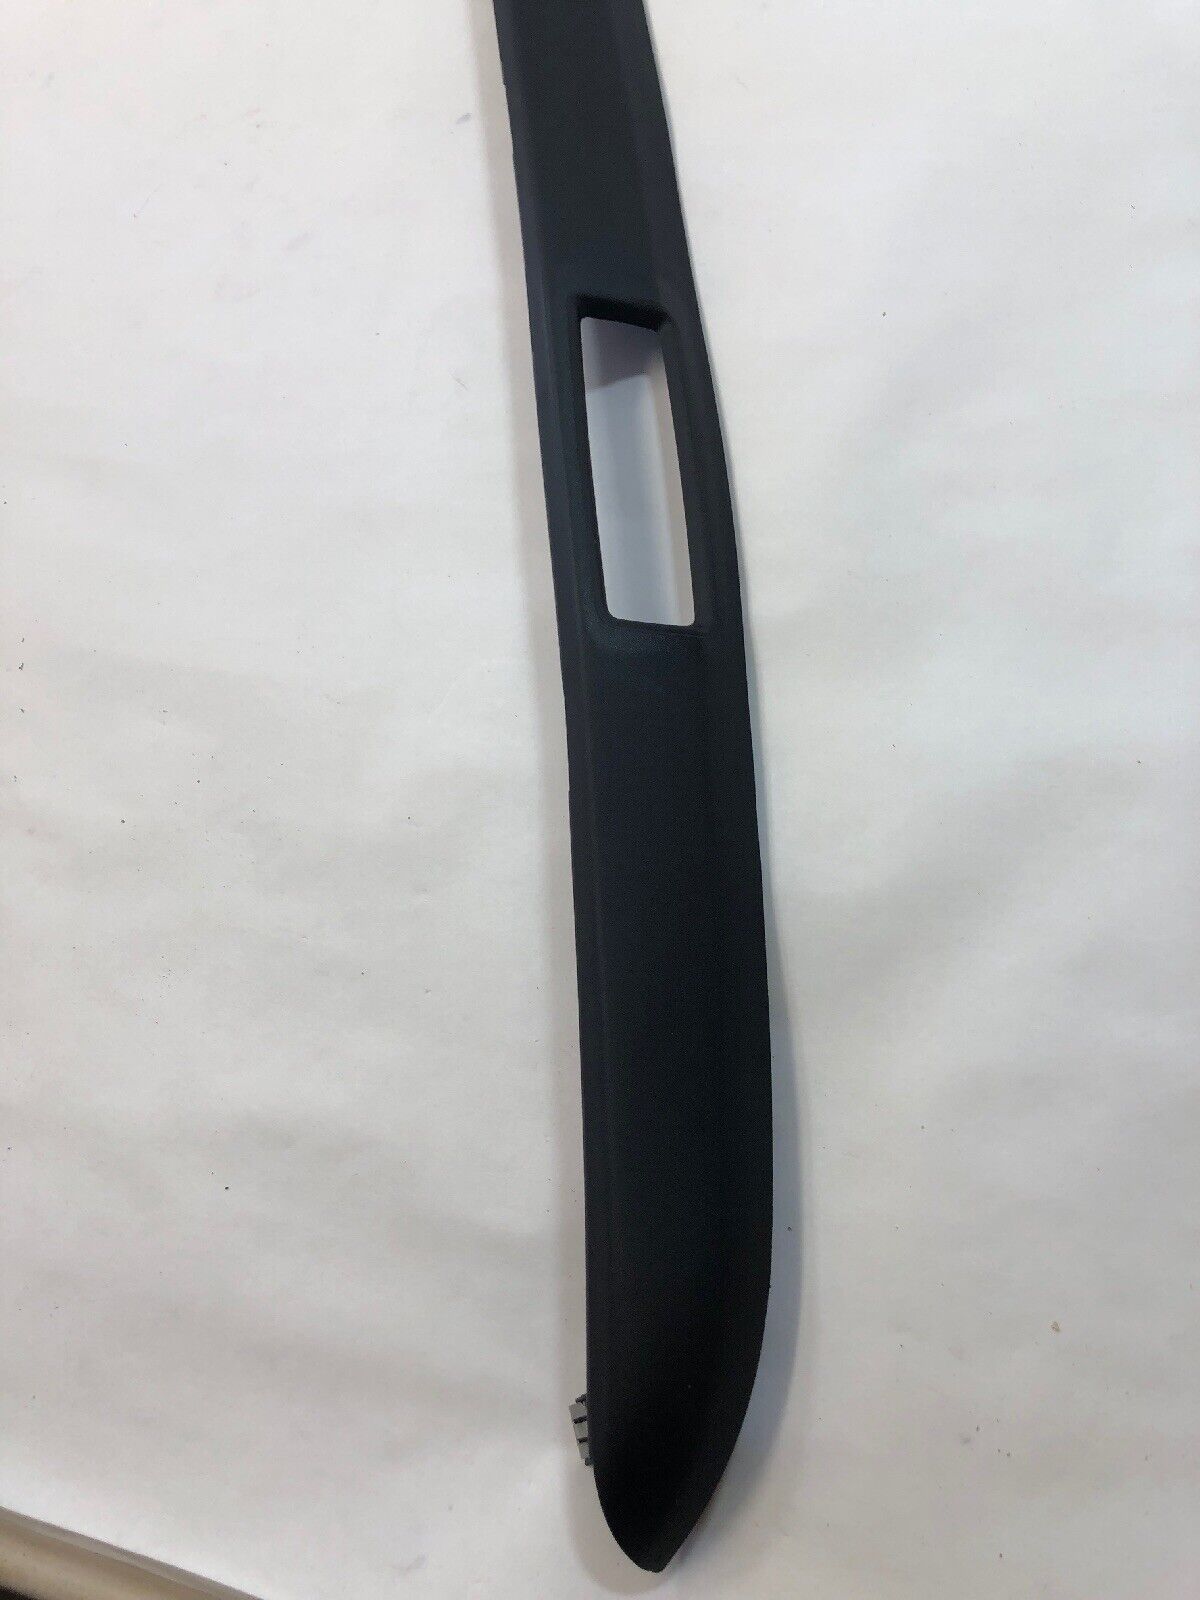 OEM Ford Mustang Interior Roof Molding Trim Convertible 2015-18  FR3Z7650046AA